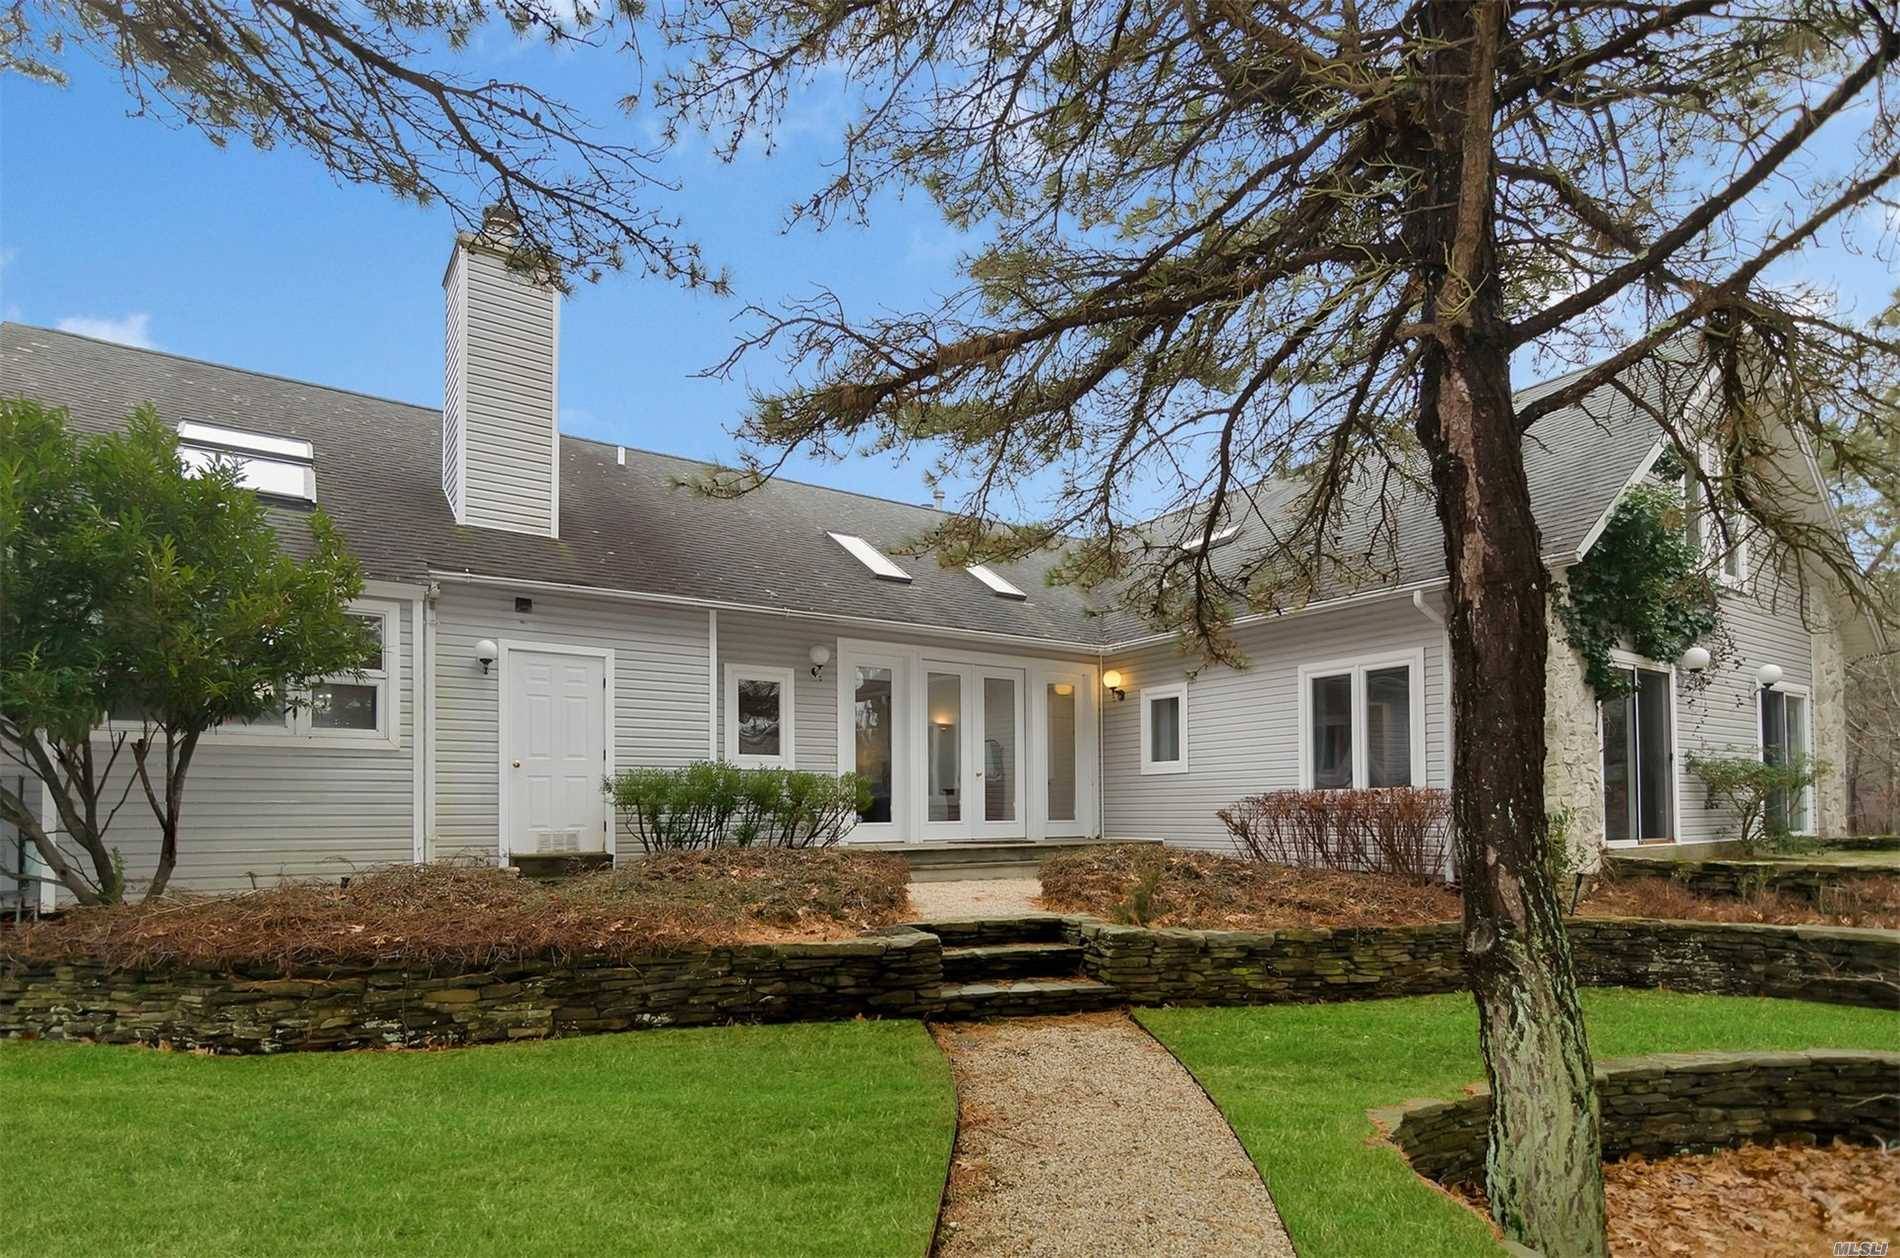 This Gem By The Ocean Is The Best Of Both Worlds In The Coveted Amagansett Dunes Ideal For Both Entertaining And Privacy.